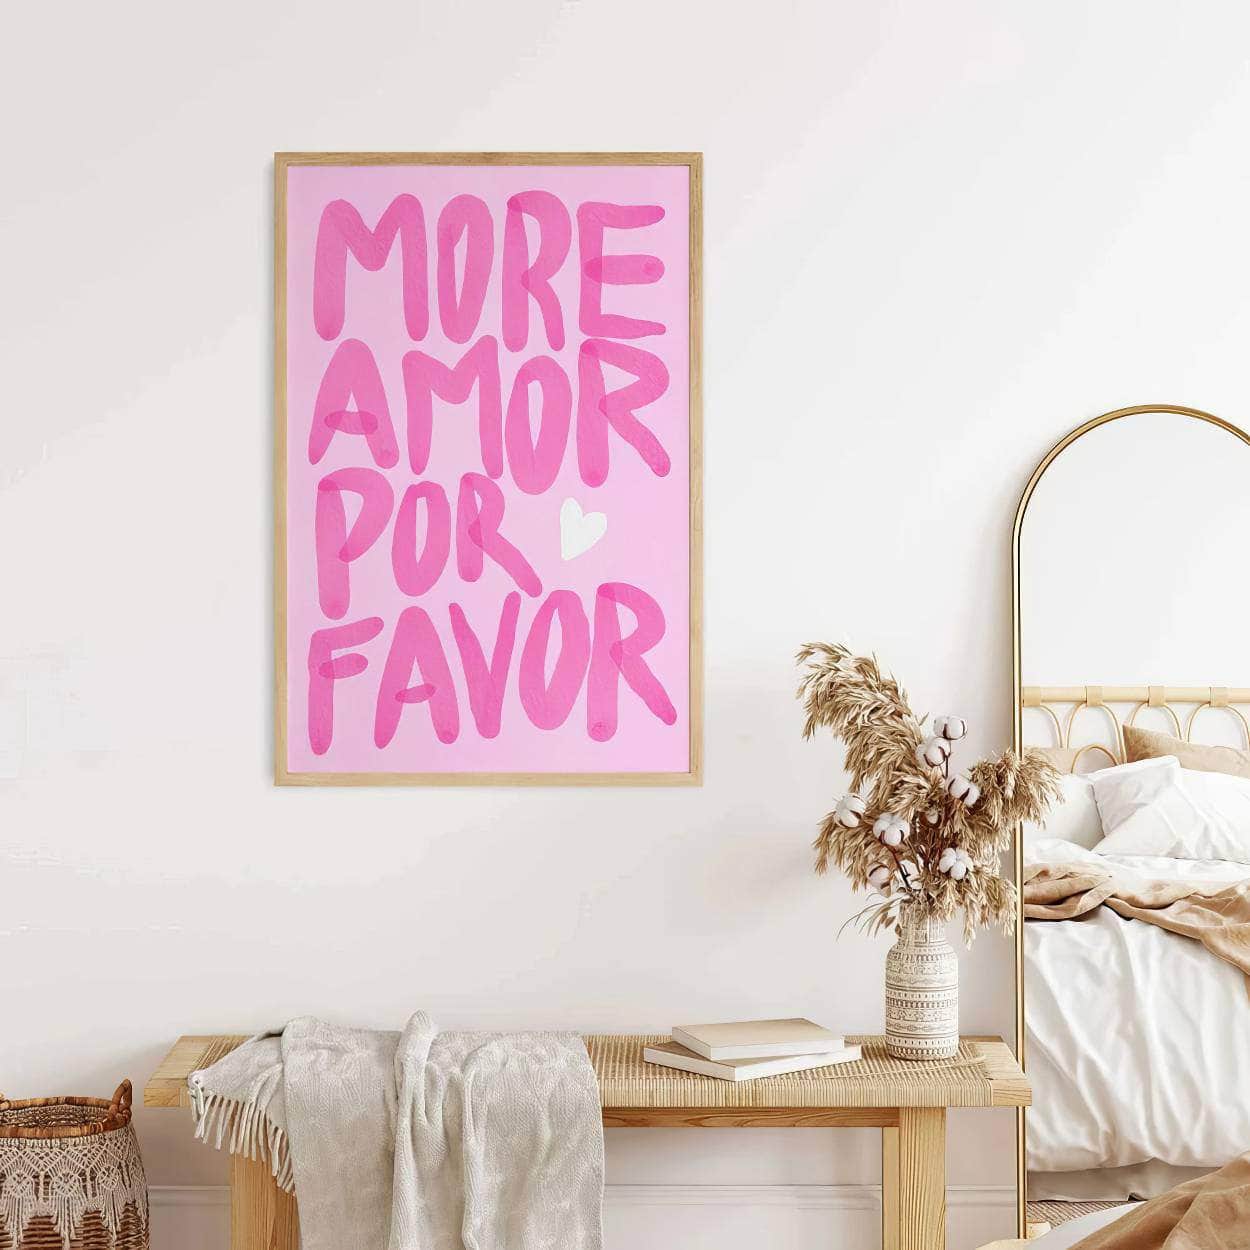 Maximalist Love Quote Canvas: 'More Amor Por Favor' - Colorful Eclectic Pink Wall Art for Living Room Decor